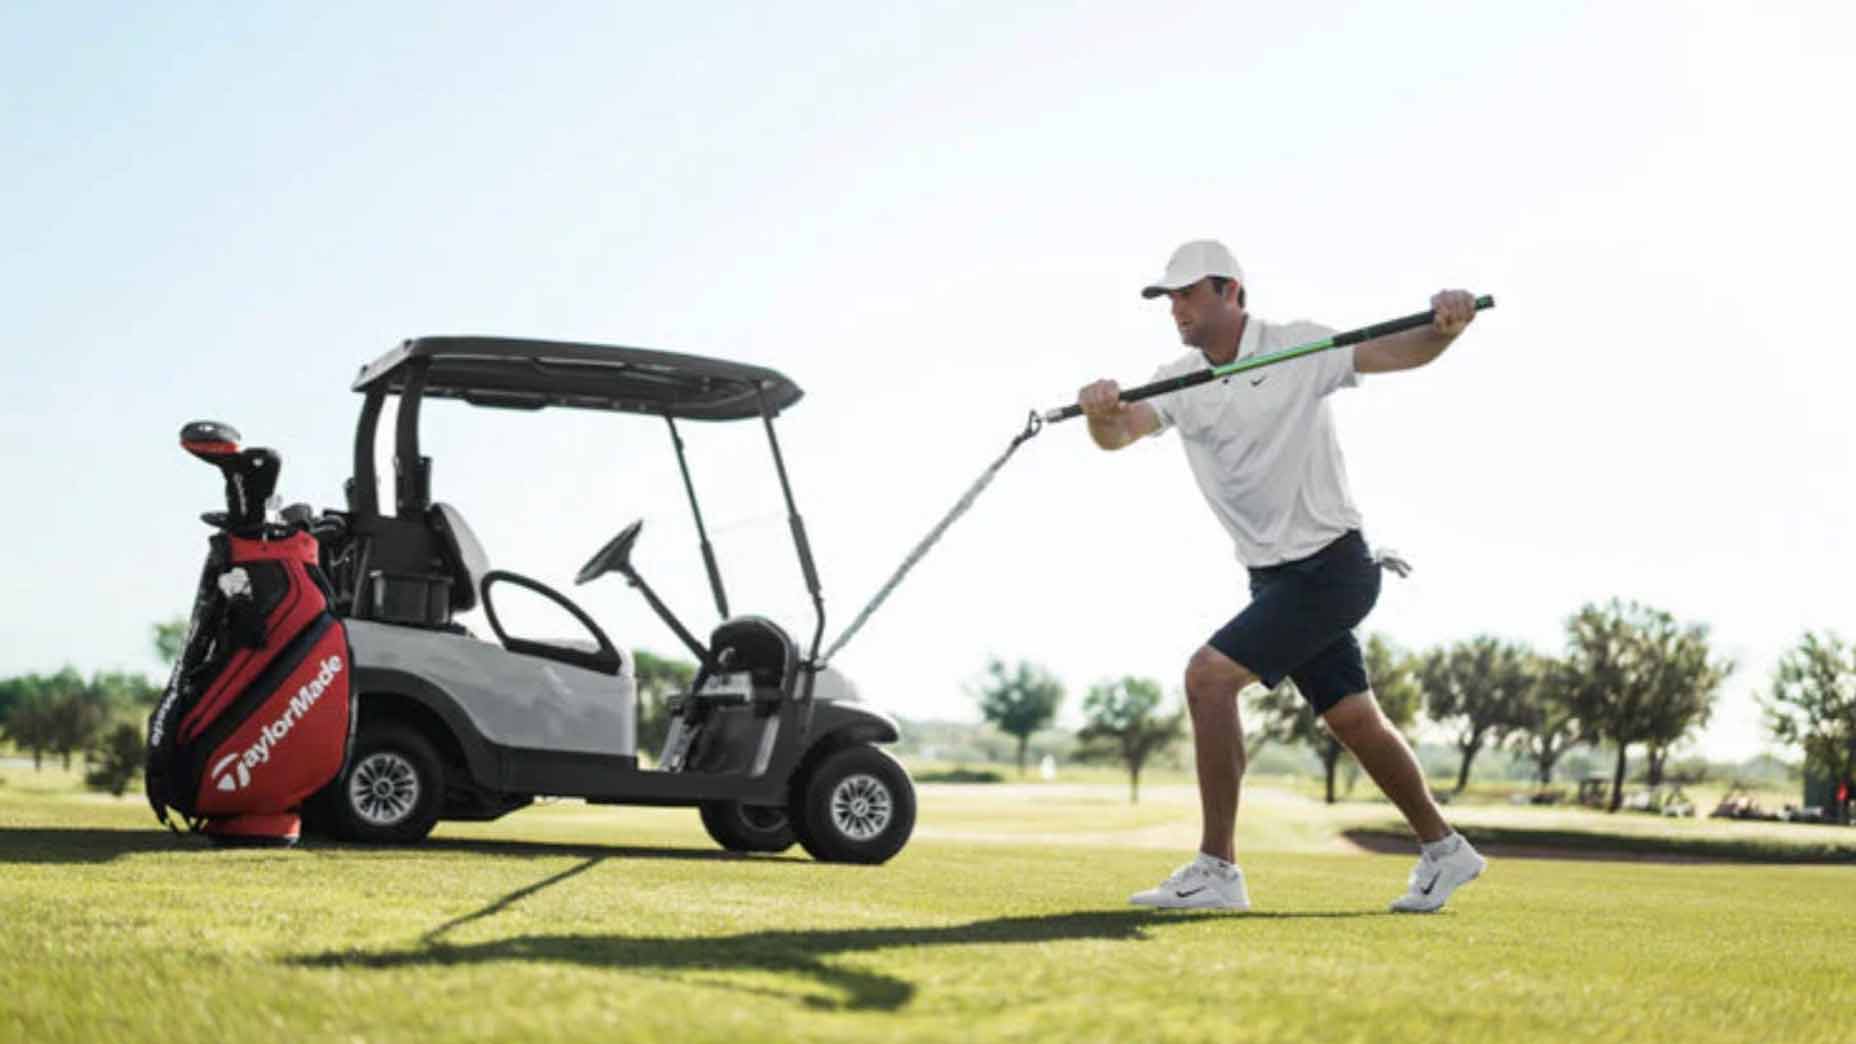 scottie scheffler uses the golf forever swing trainer attached to a golf cart